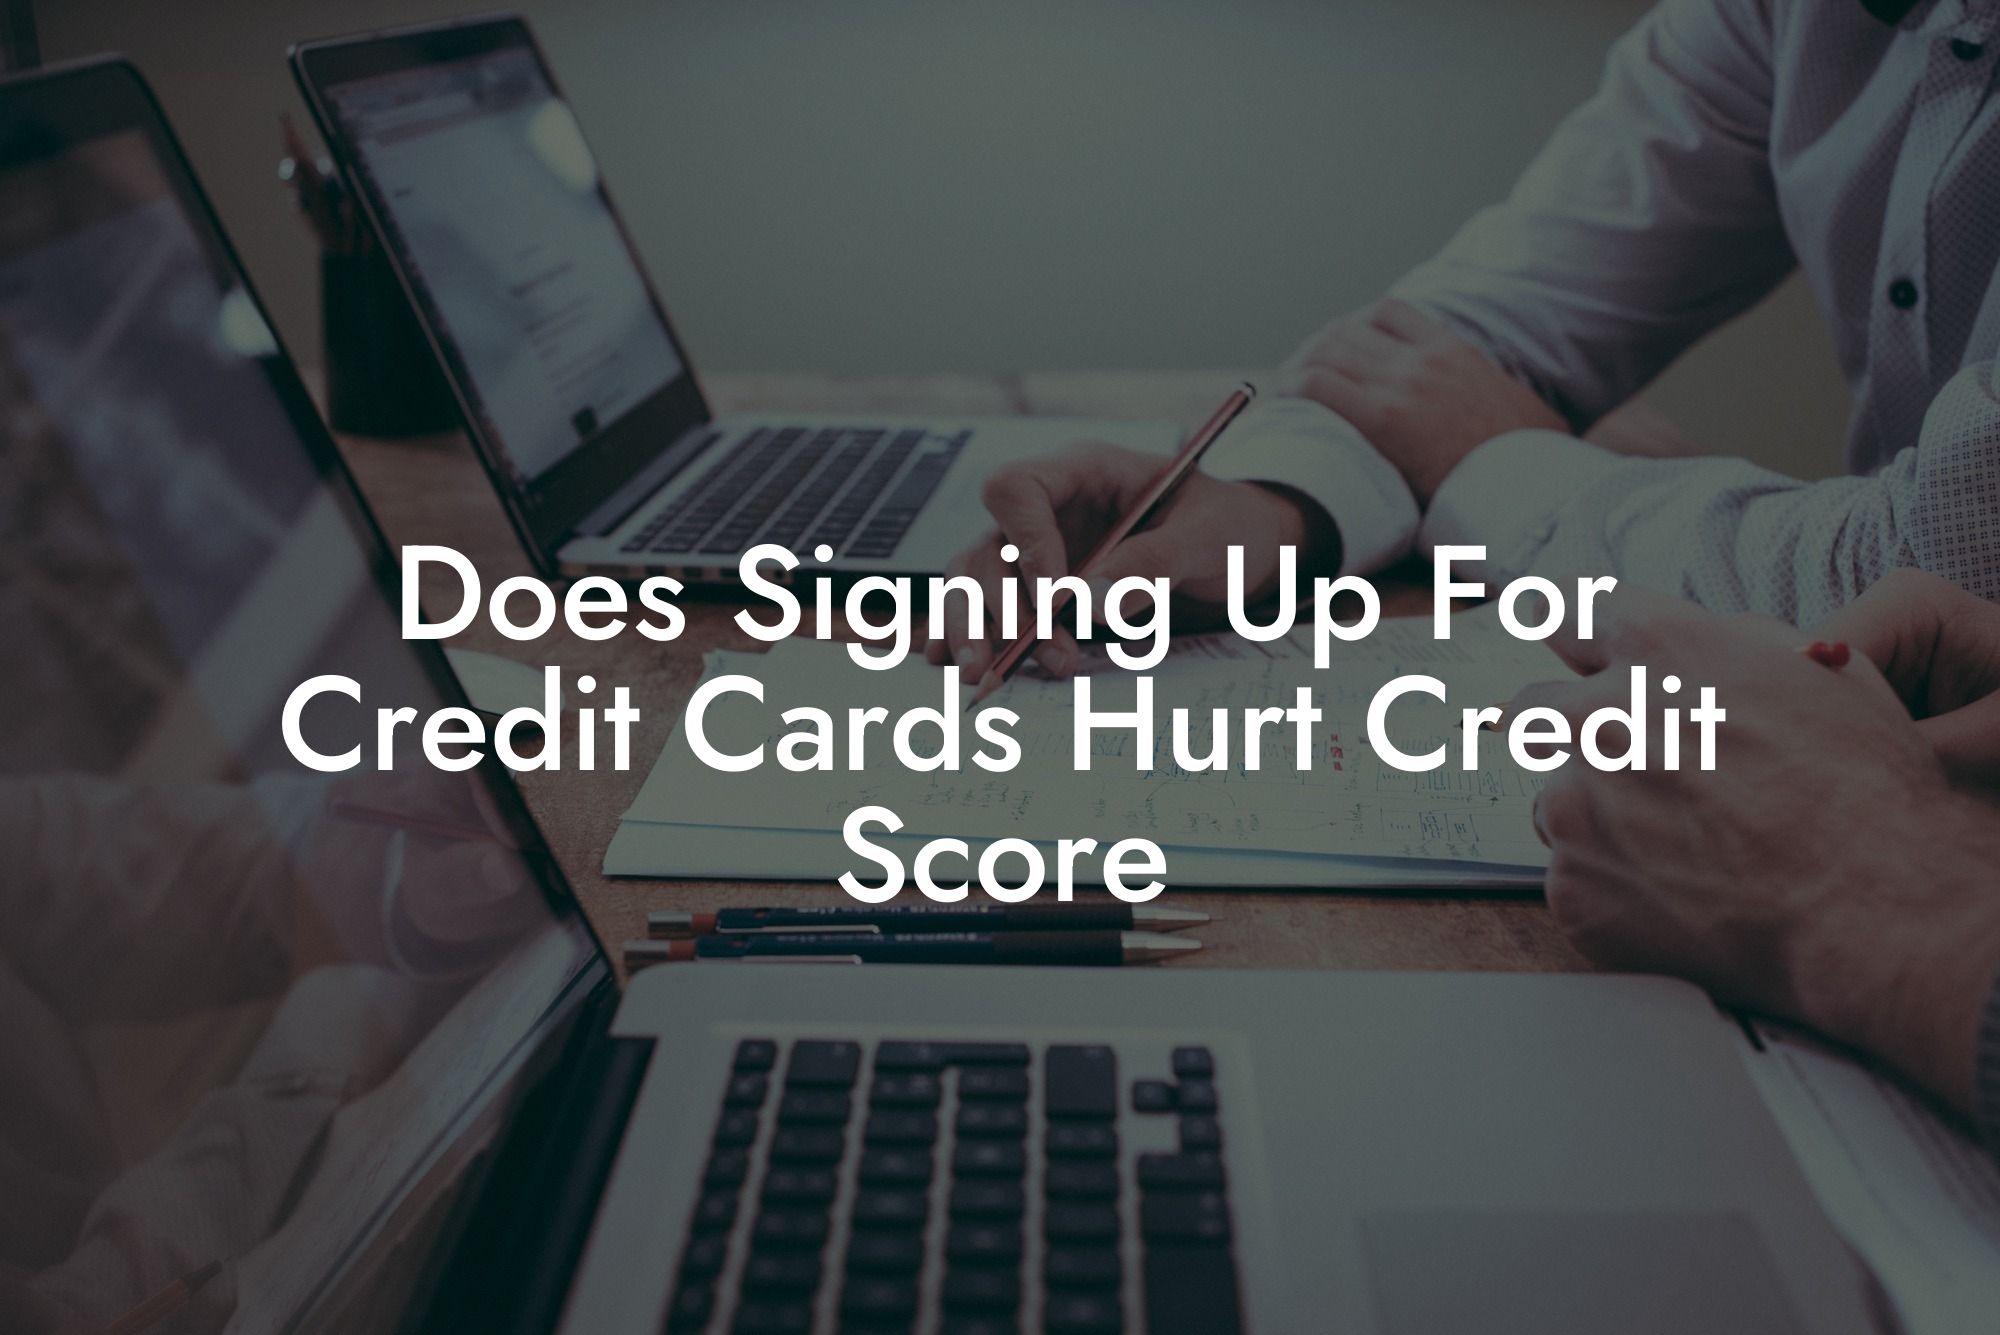 Does Signing Up For Credit Cards Hurt Credit Score